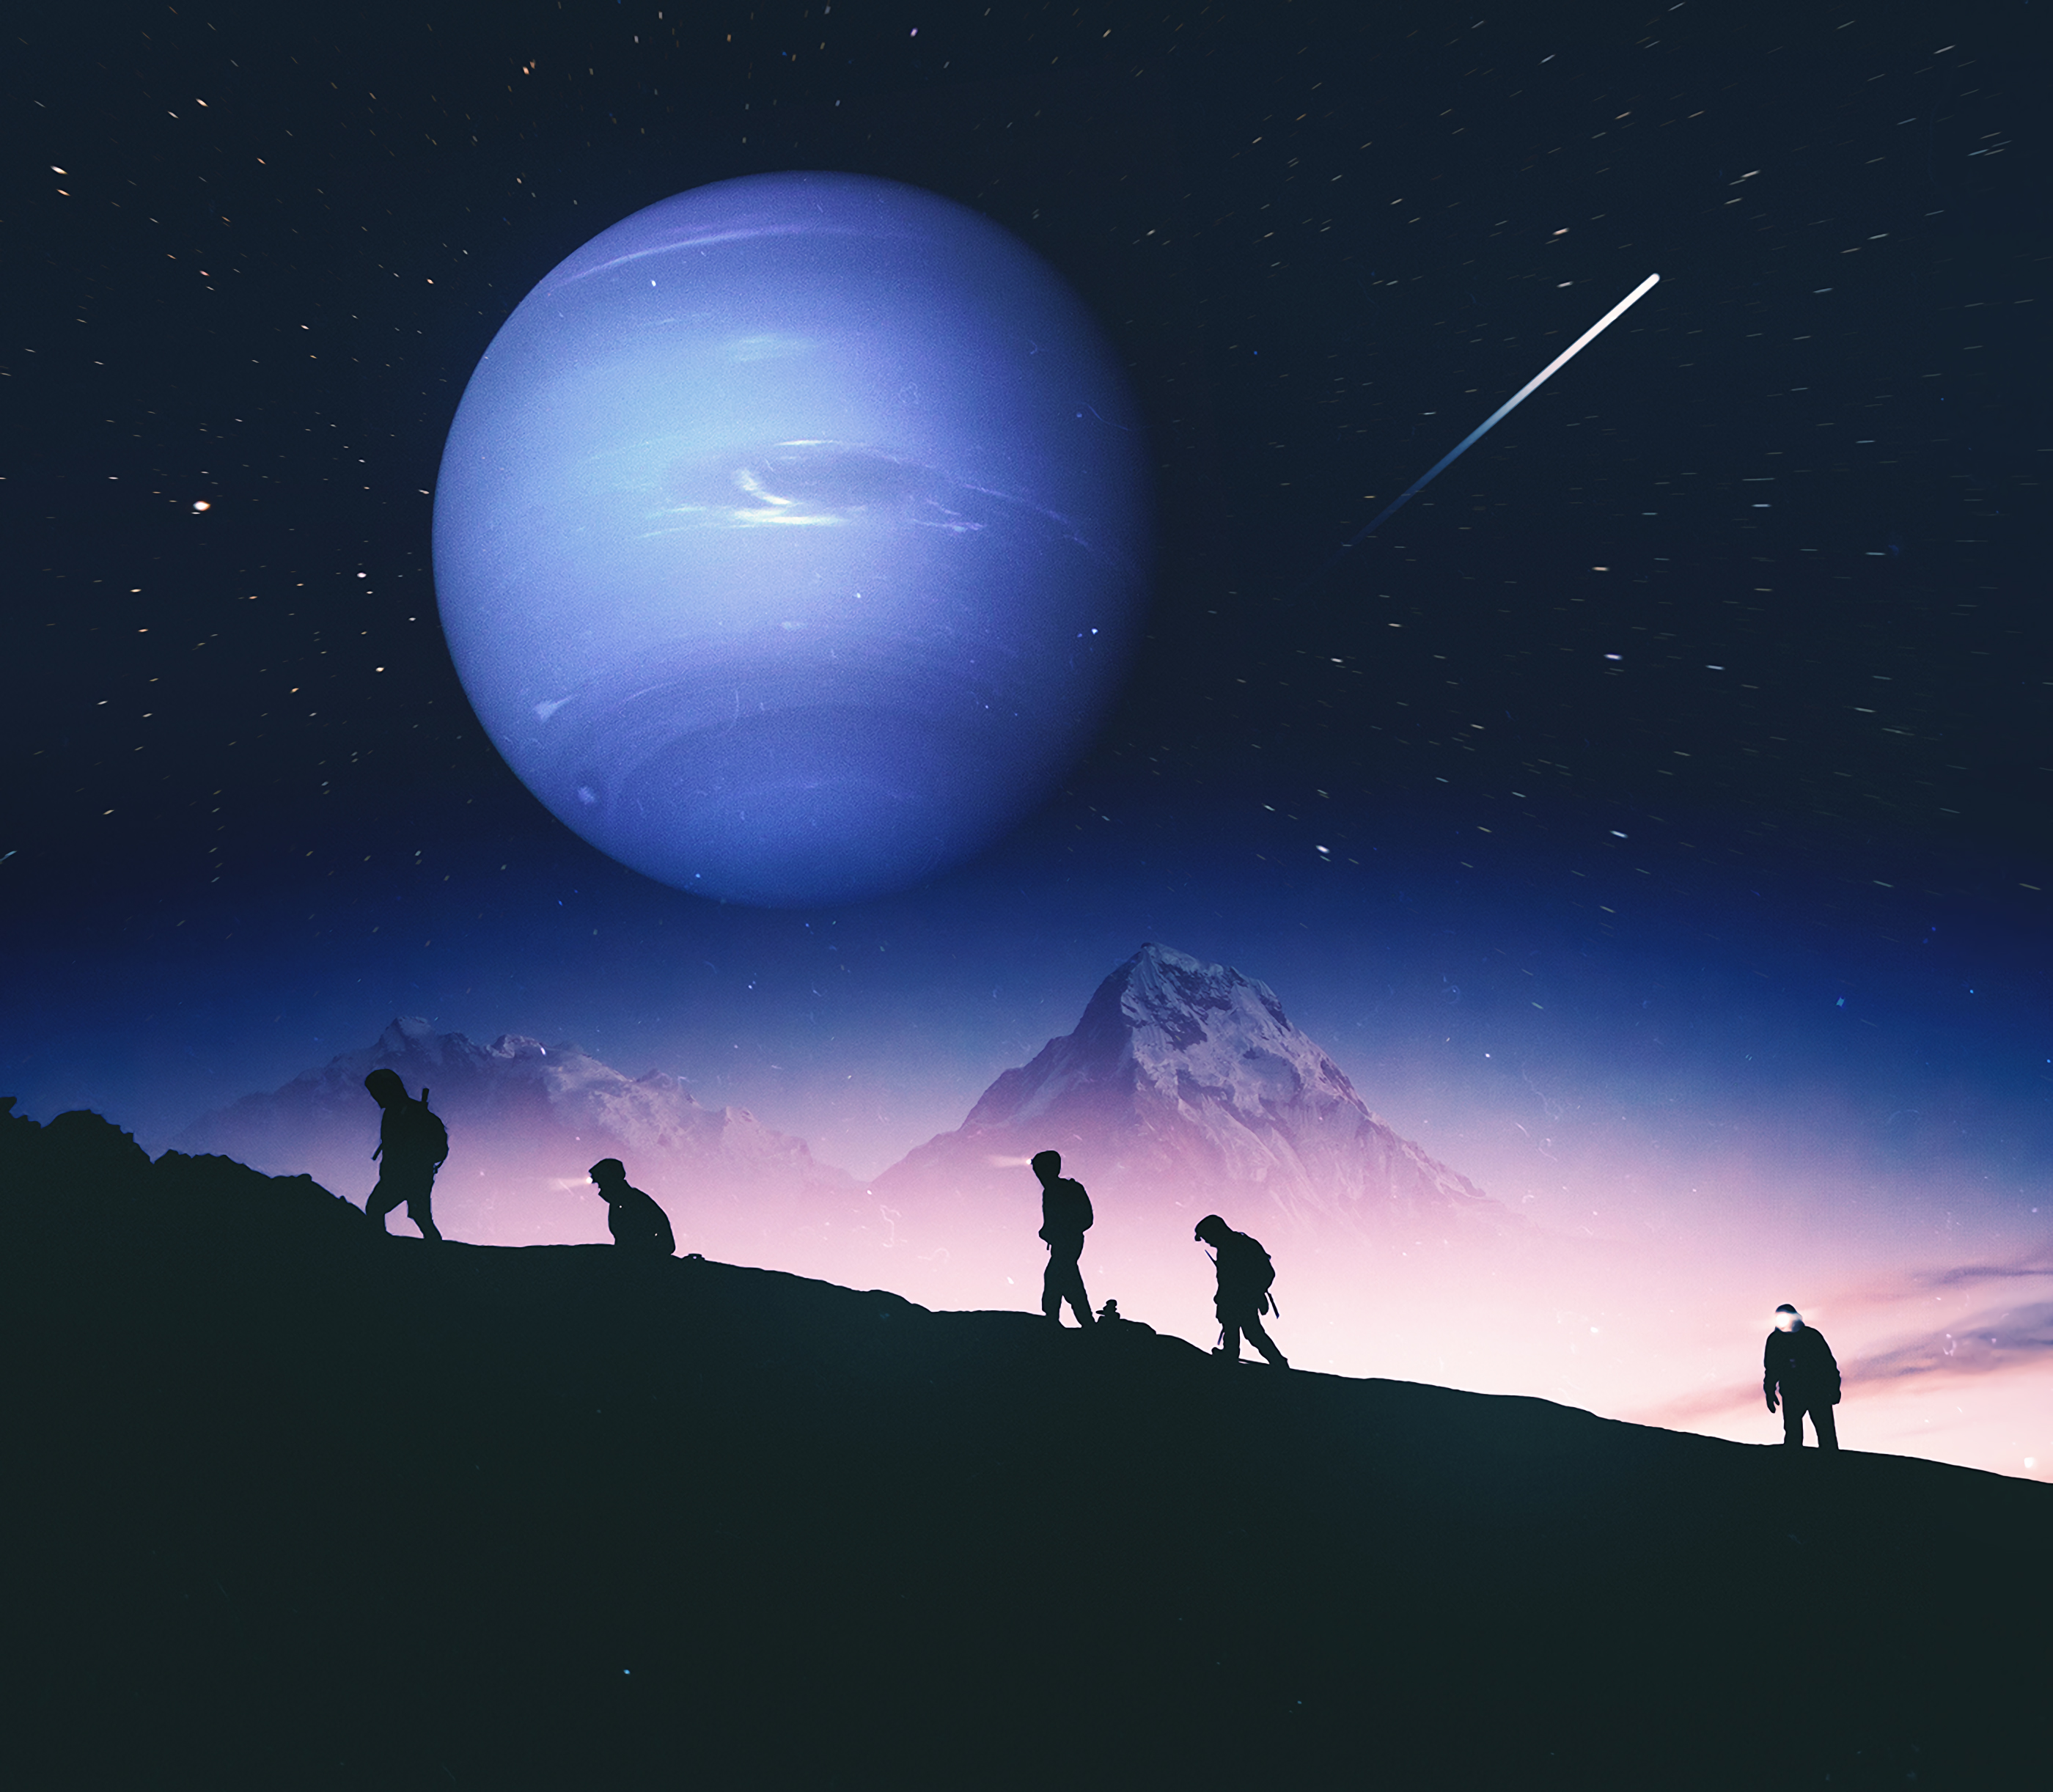 android universe, planet, people, mountains, miscellanea, miscellaneous, silhouettes